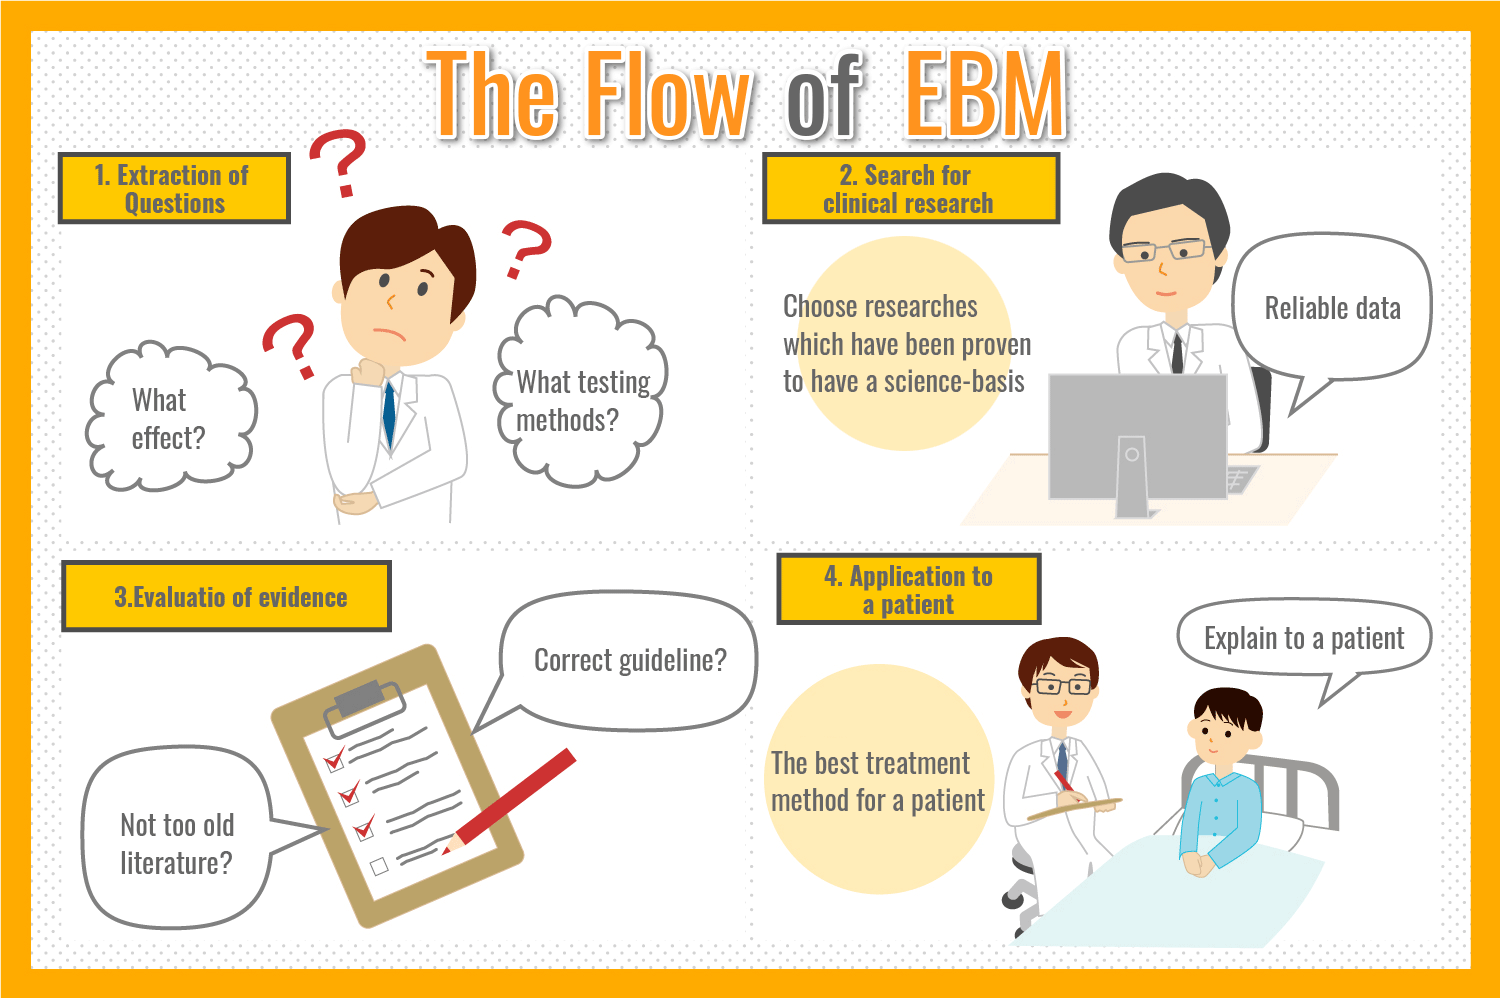 The Flow of EBM